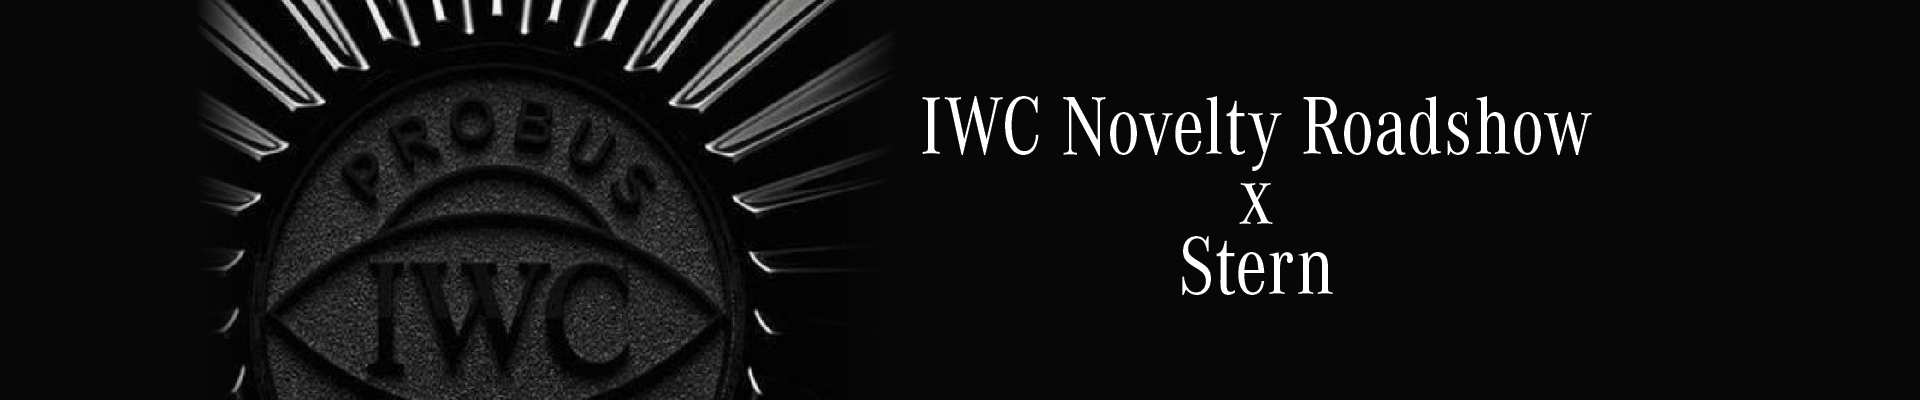 IWC Novelty Collection Roadshow